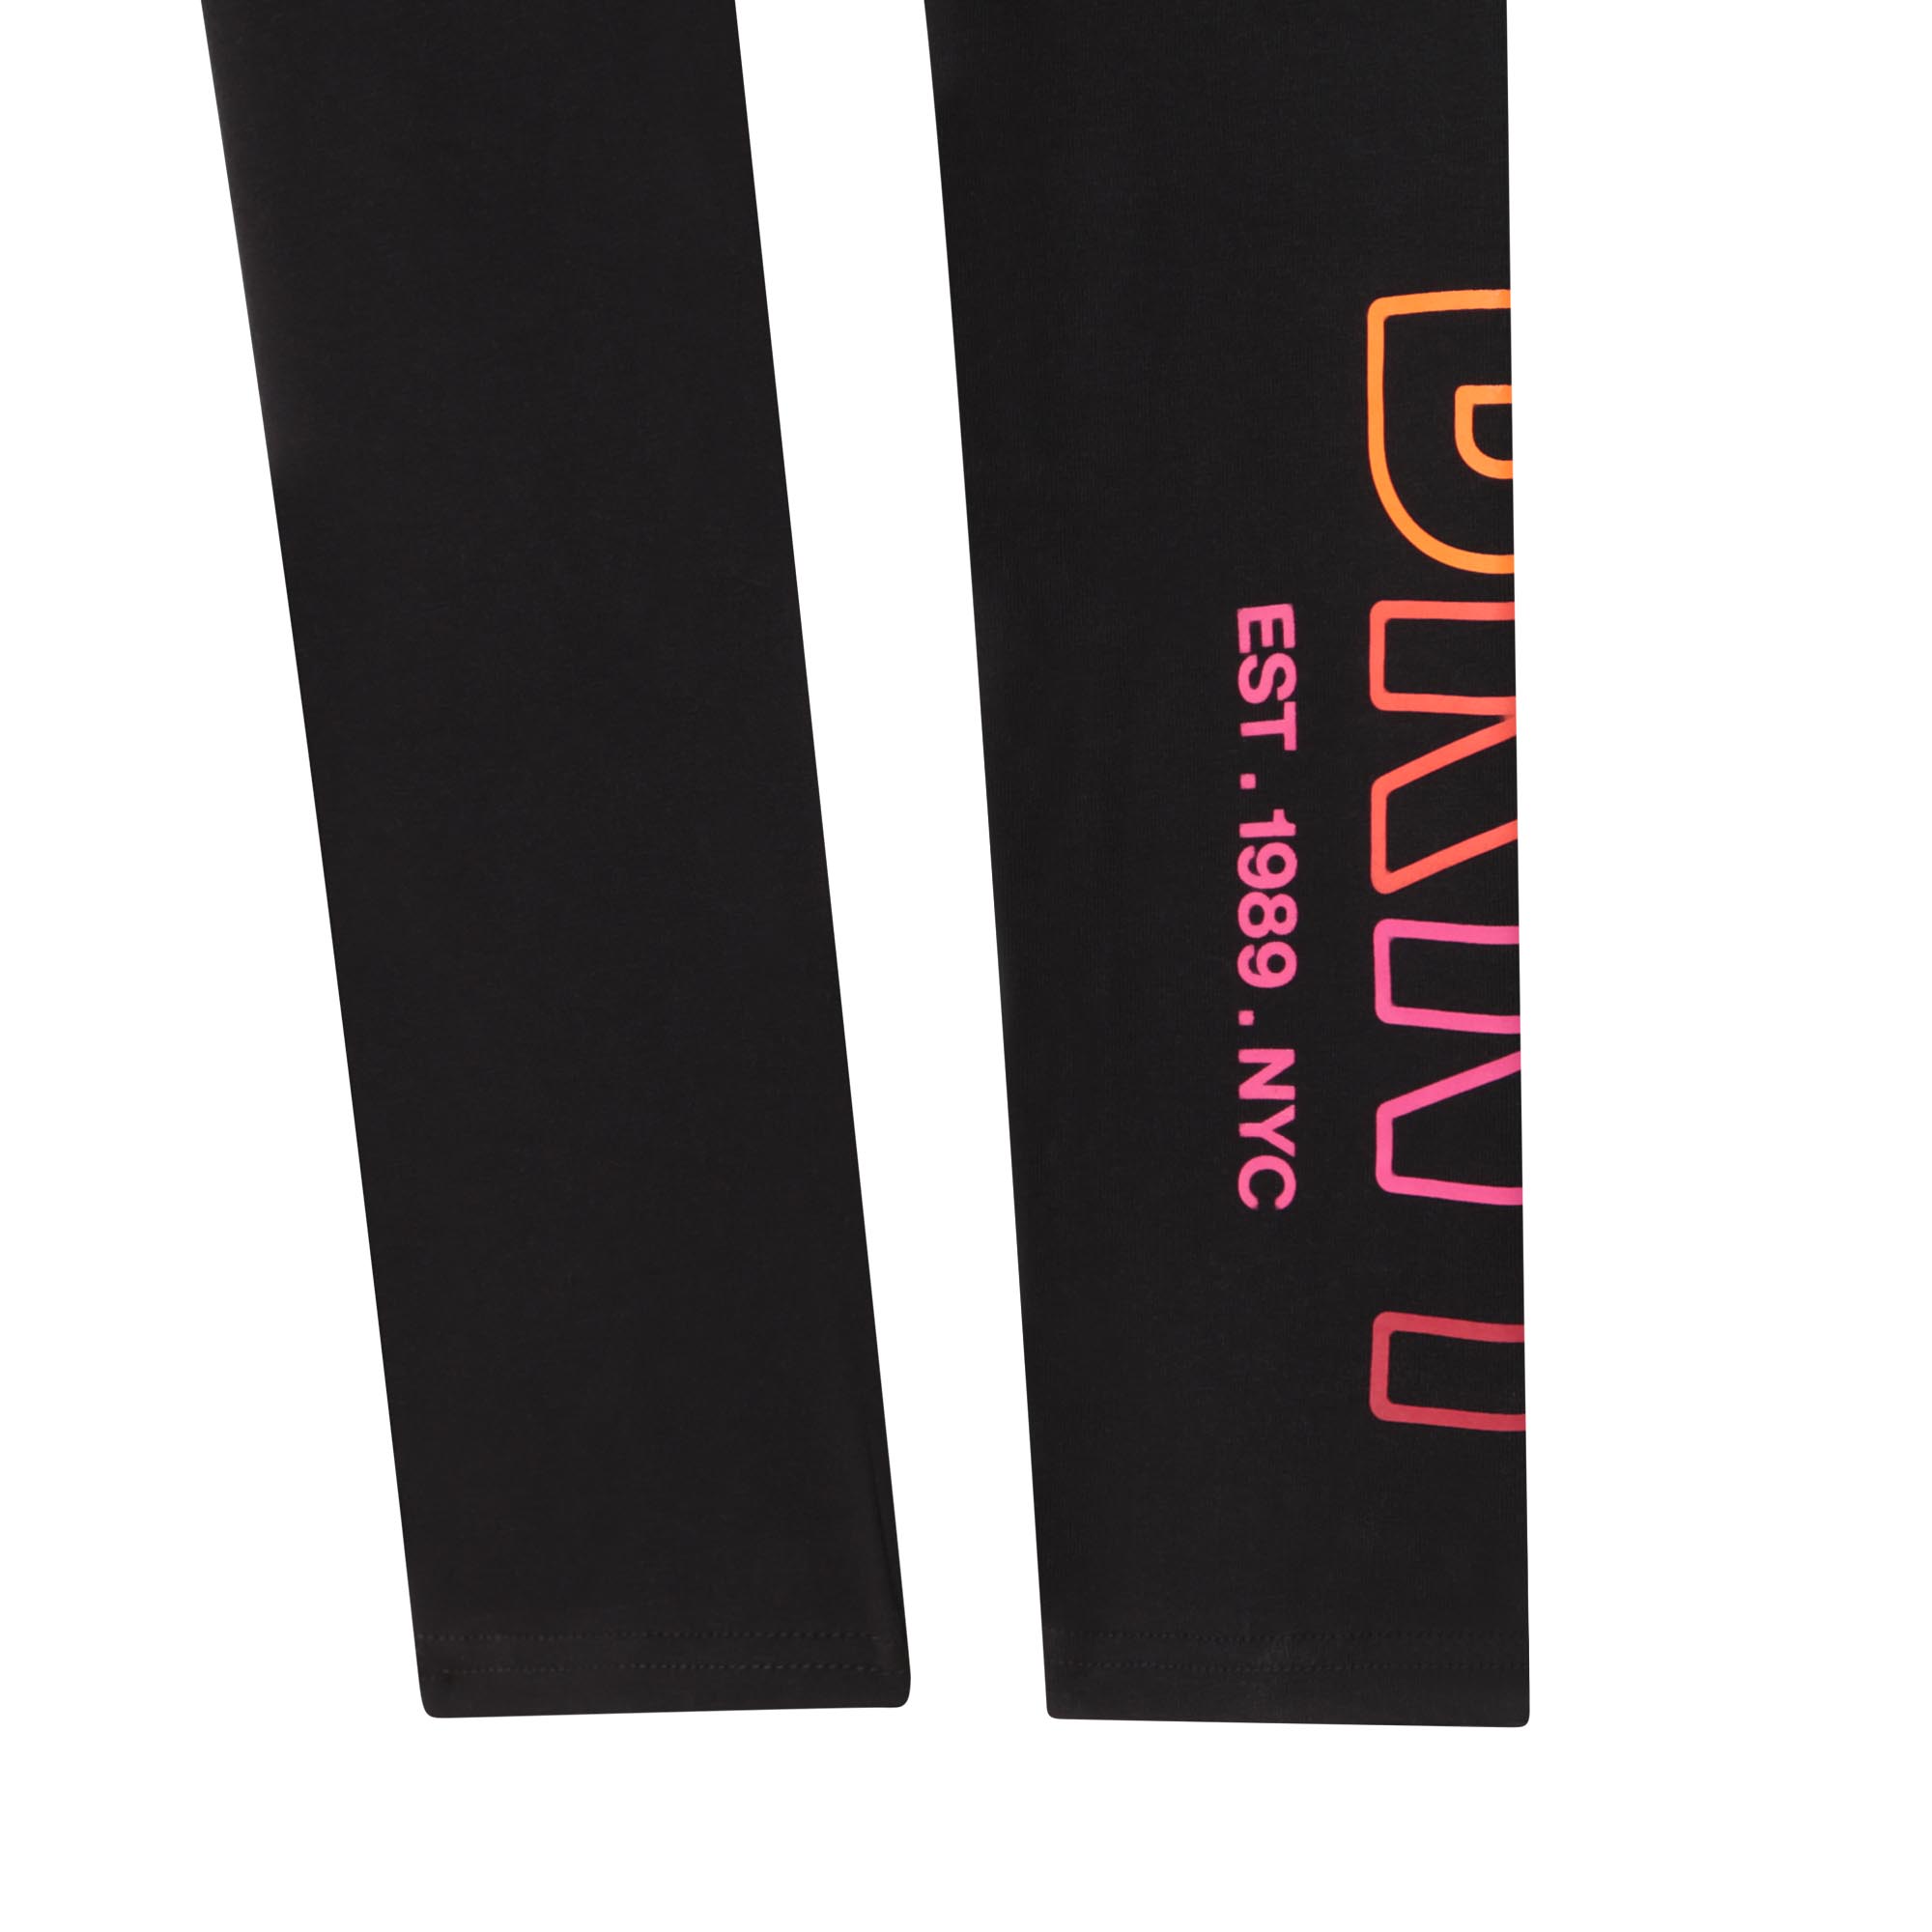 DKNY black leggings with pink waist band close up